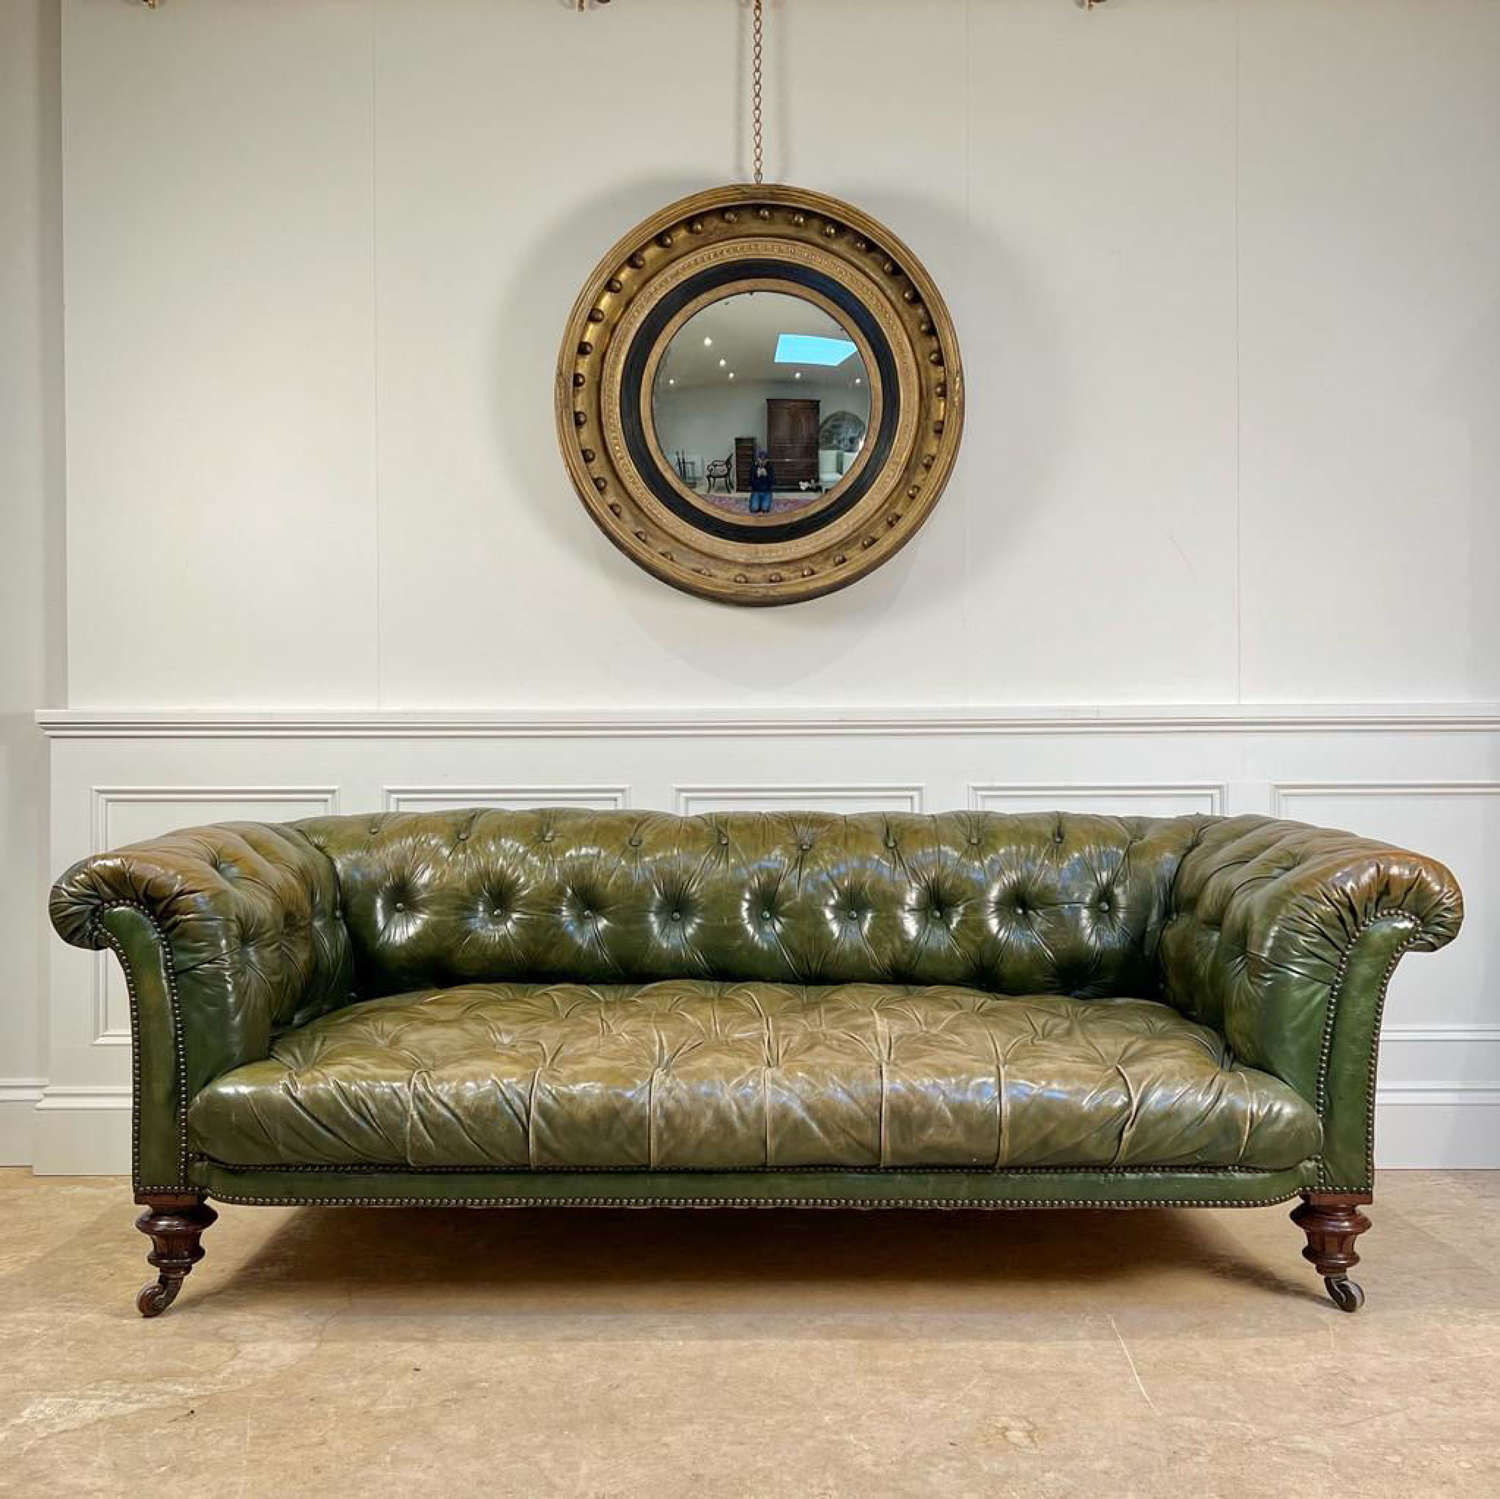 Superb 19th C Leather Chesterfield Sofa